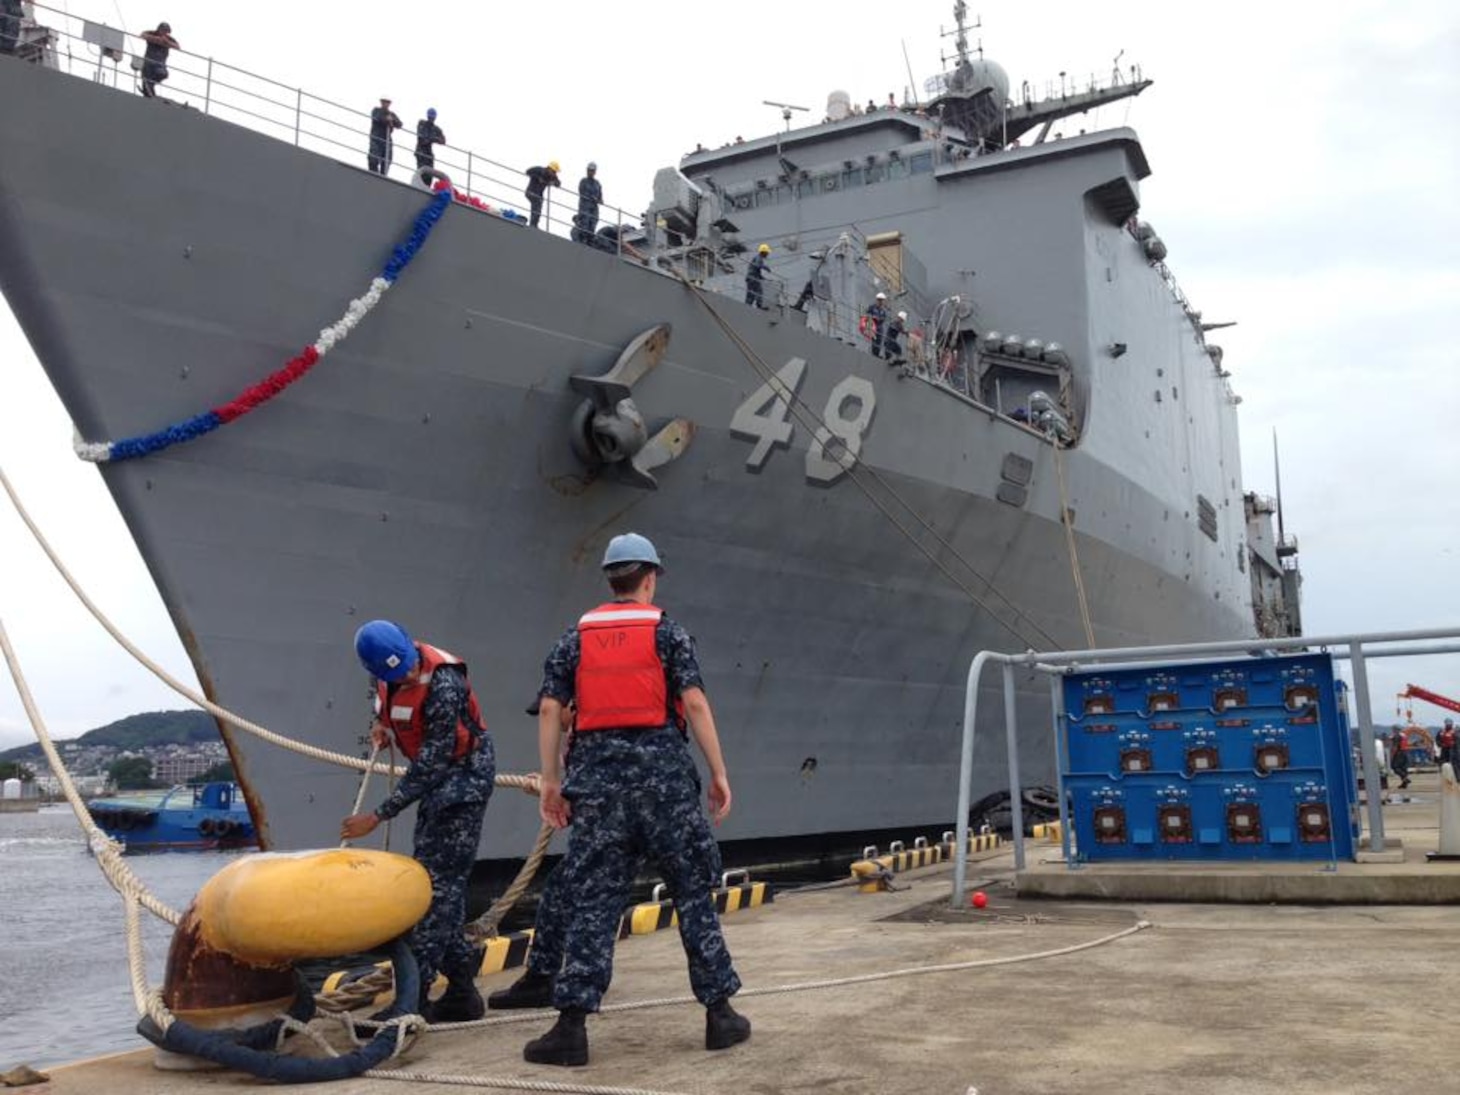 SASEBO, Japan (July 08, 2016) Sailors from port operations handle line as the amphibious dock landing ship USS Ashland (LSD 48) is moored to the pier. Ashland, part of Amphibious Force 7th Fleet, is returning from a recent patrol in support of the 2016 Cooperation Afloat Readiness and Training series. (U.S. Navy photo by Mass Communication Specialist 3rd Class Krystina Coffey /Released)